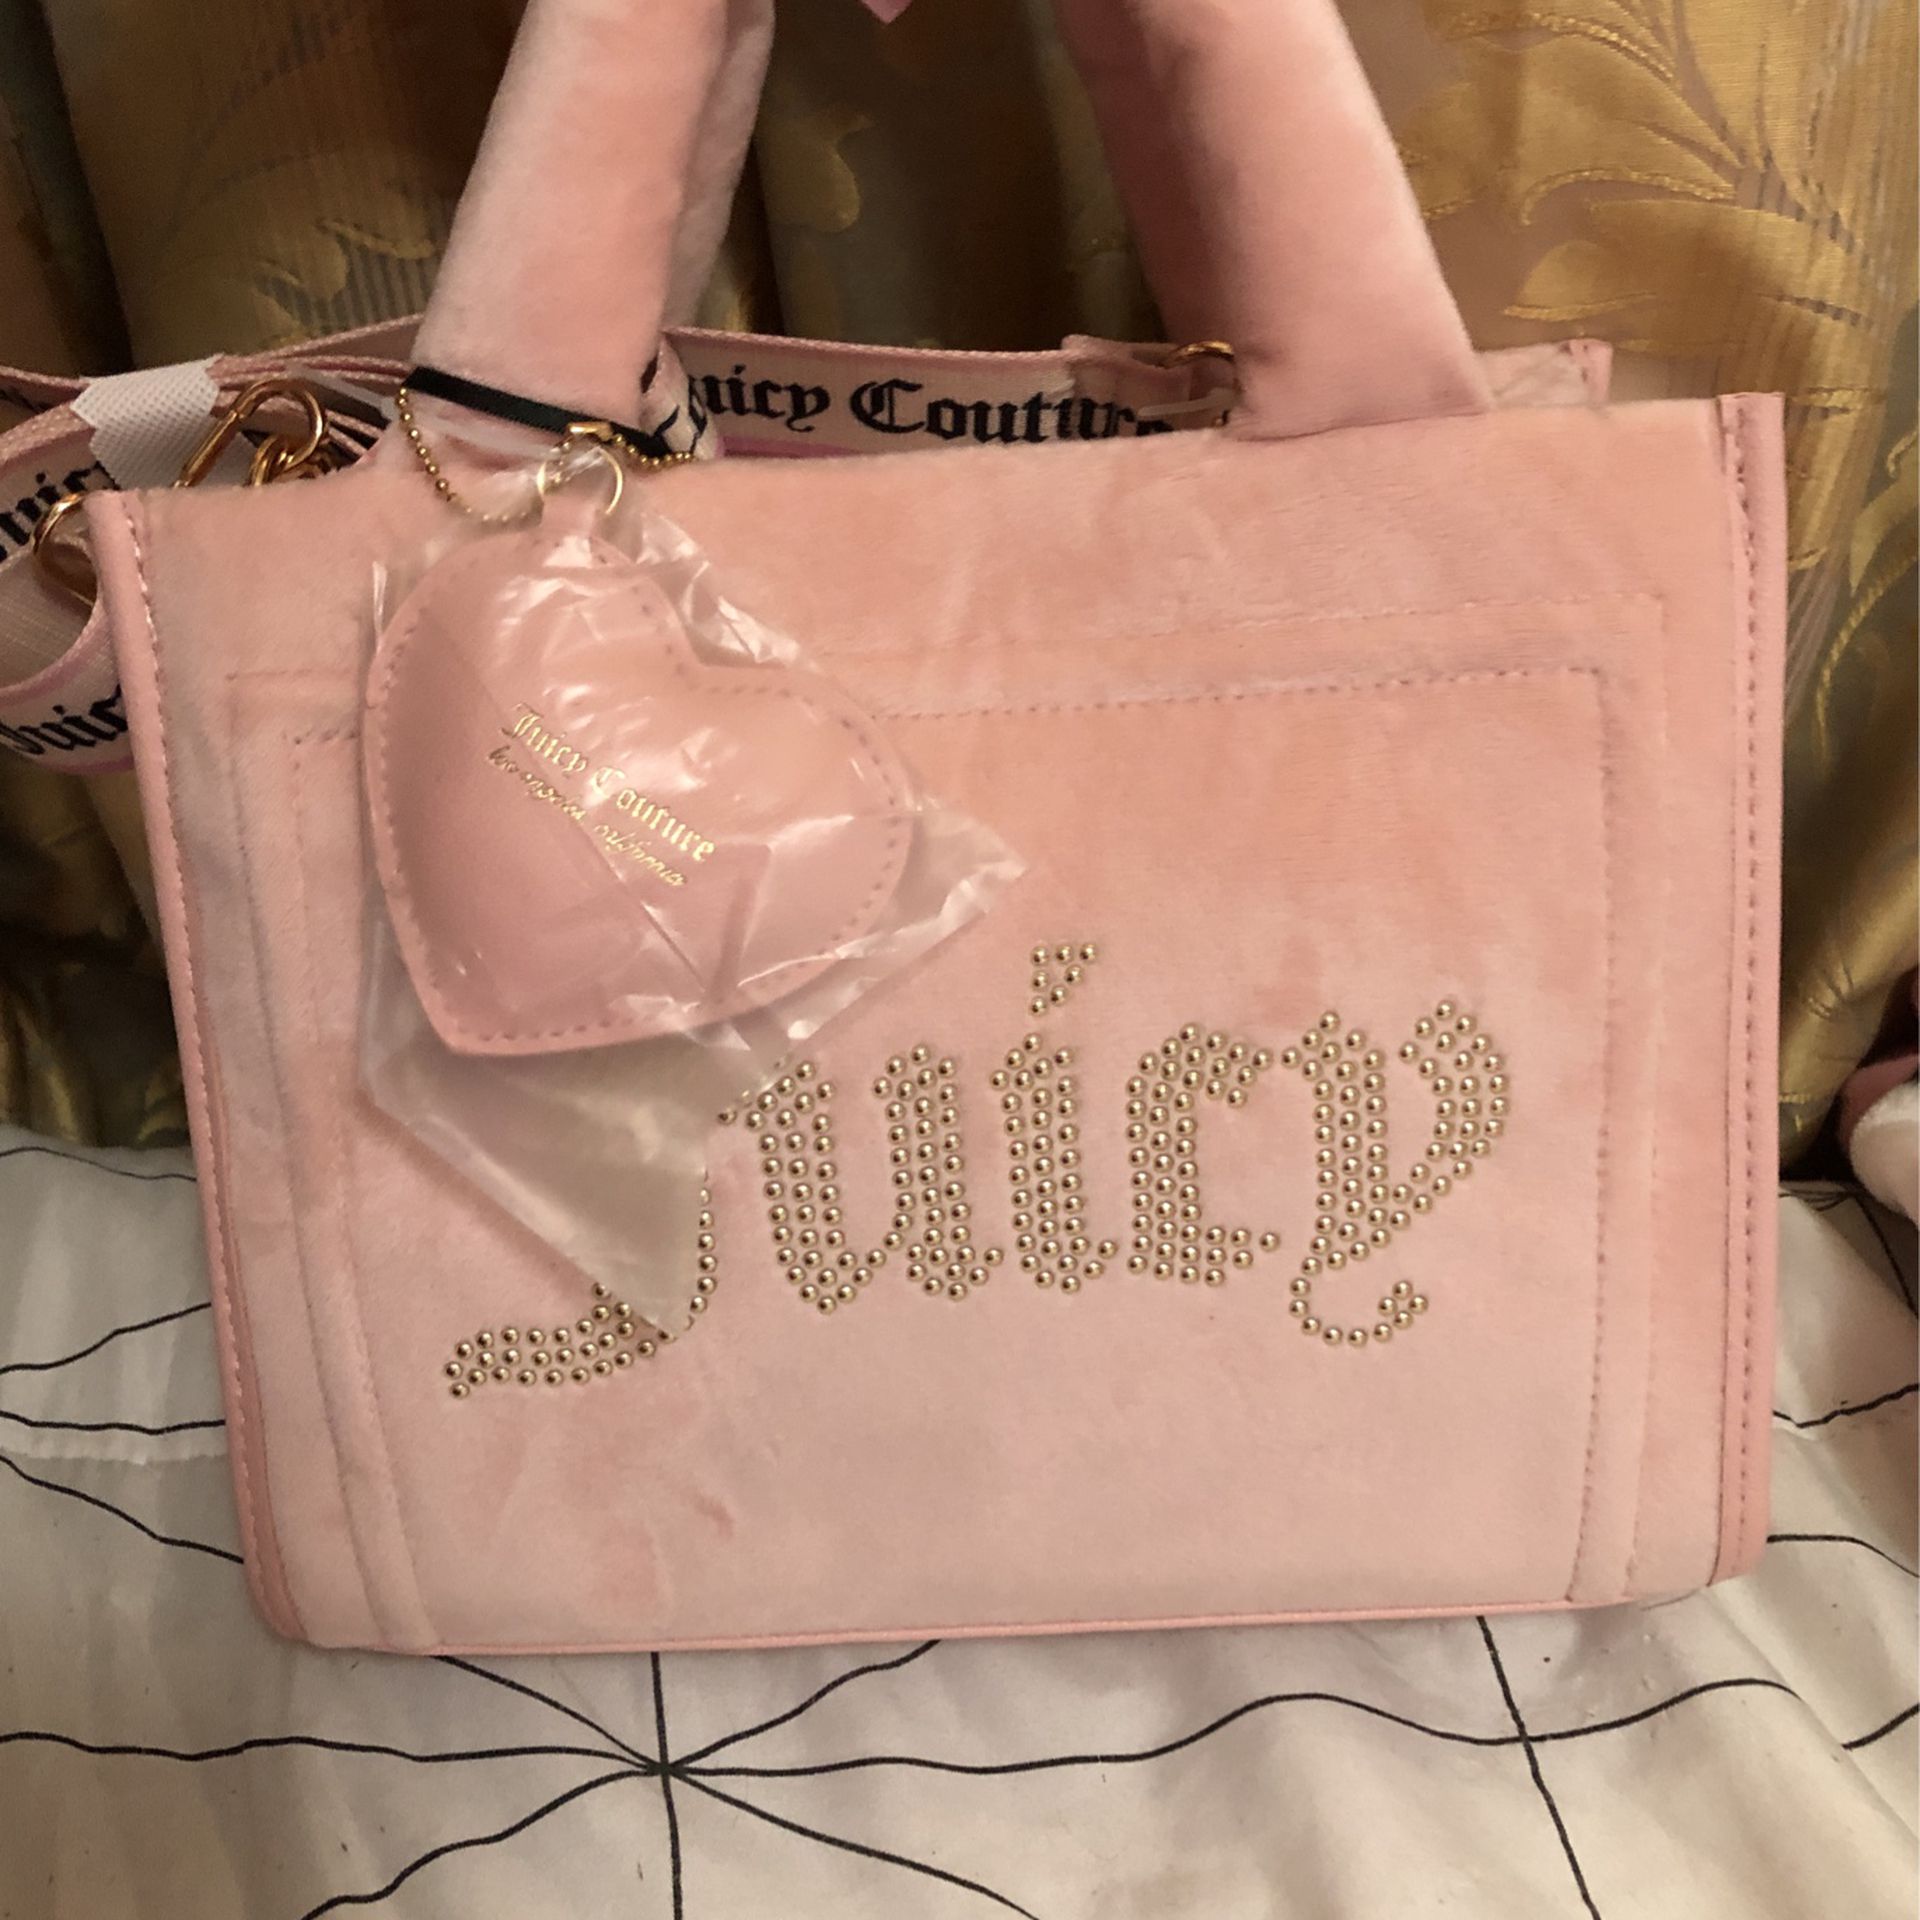  Juicy Couture Bag